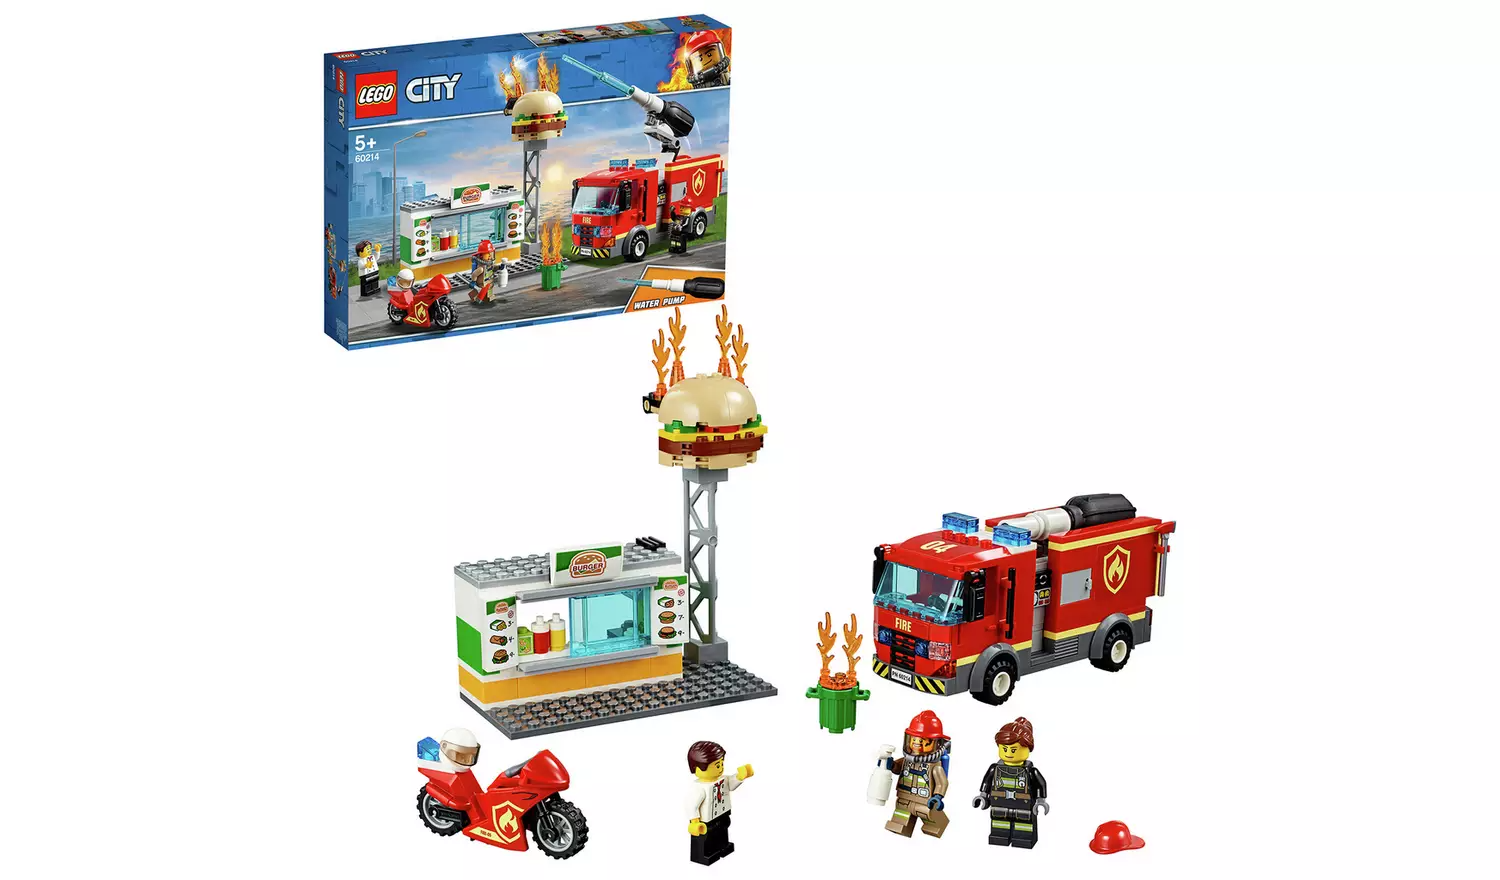 LEGO City Burger Bar Fire Rescue Toy Truck Playset- 60214